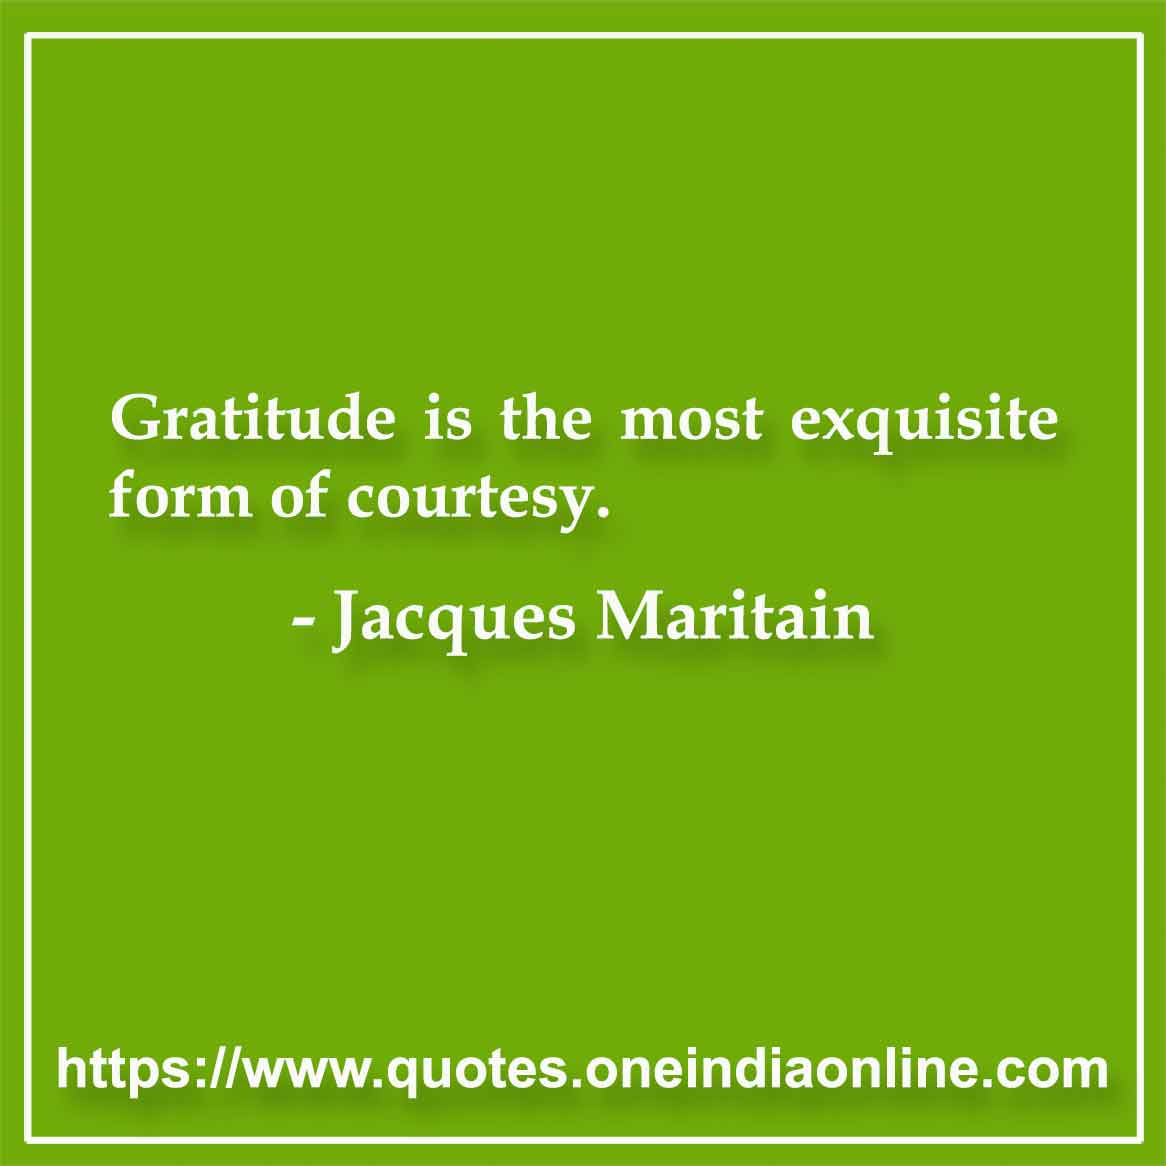 Gratitude is the most exquisite form of courtesy.

-  Jacques Maritain